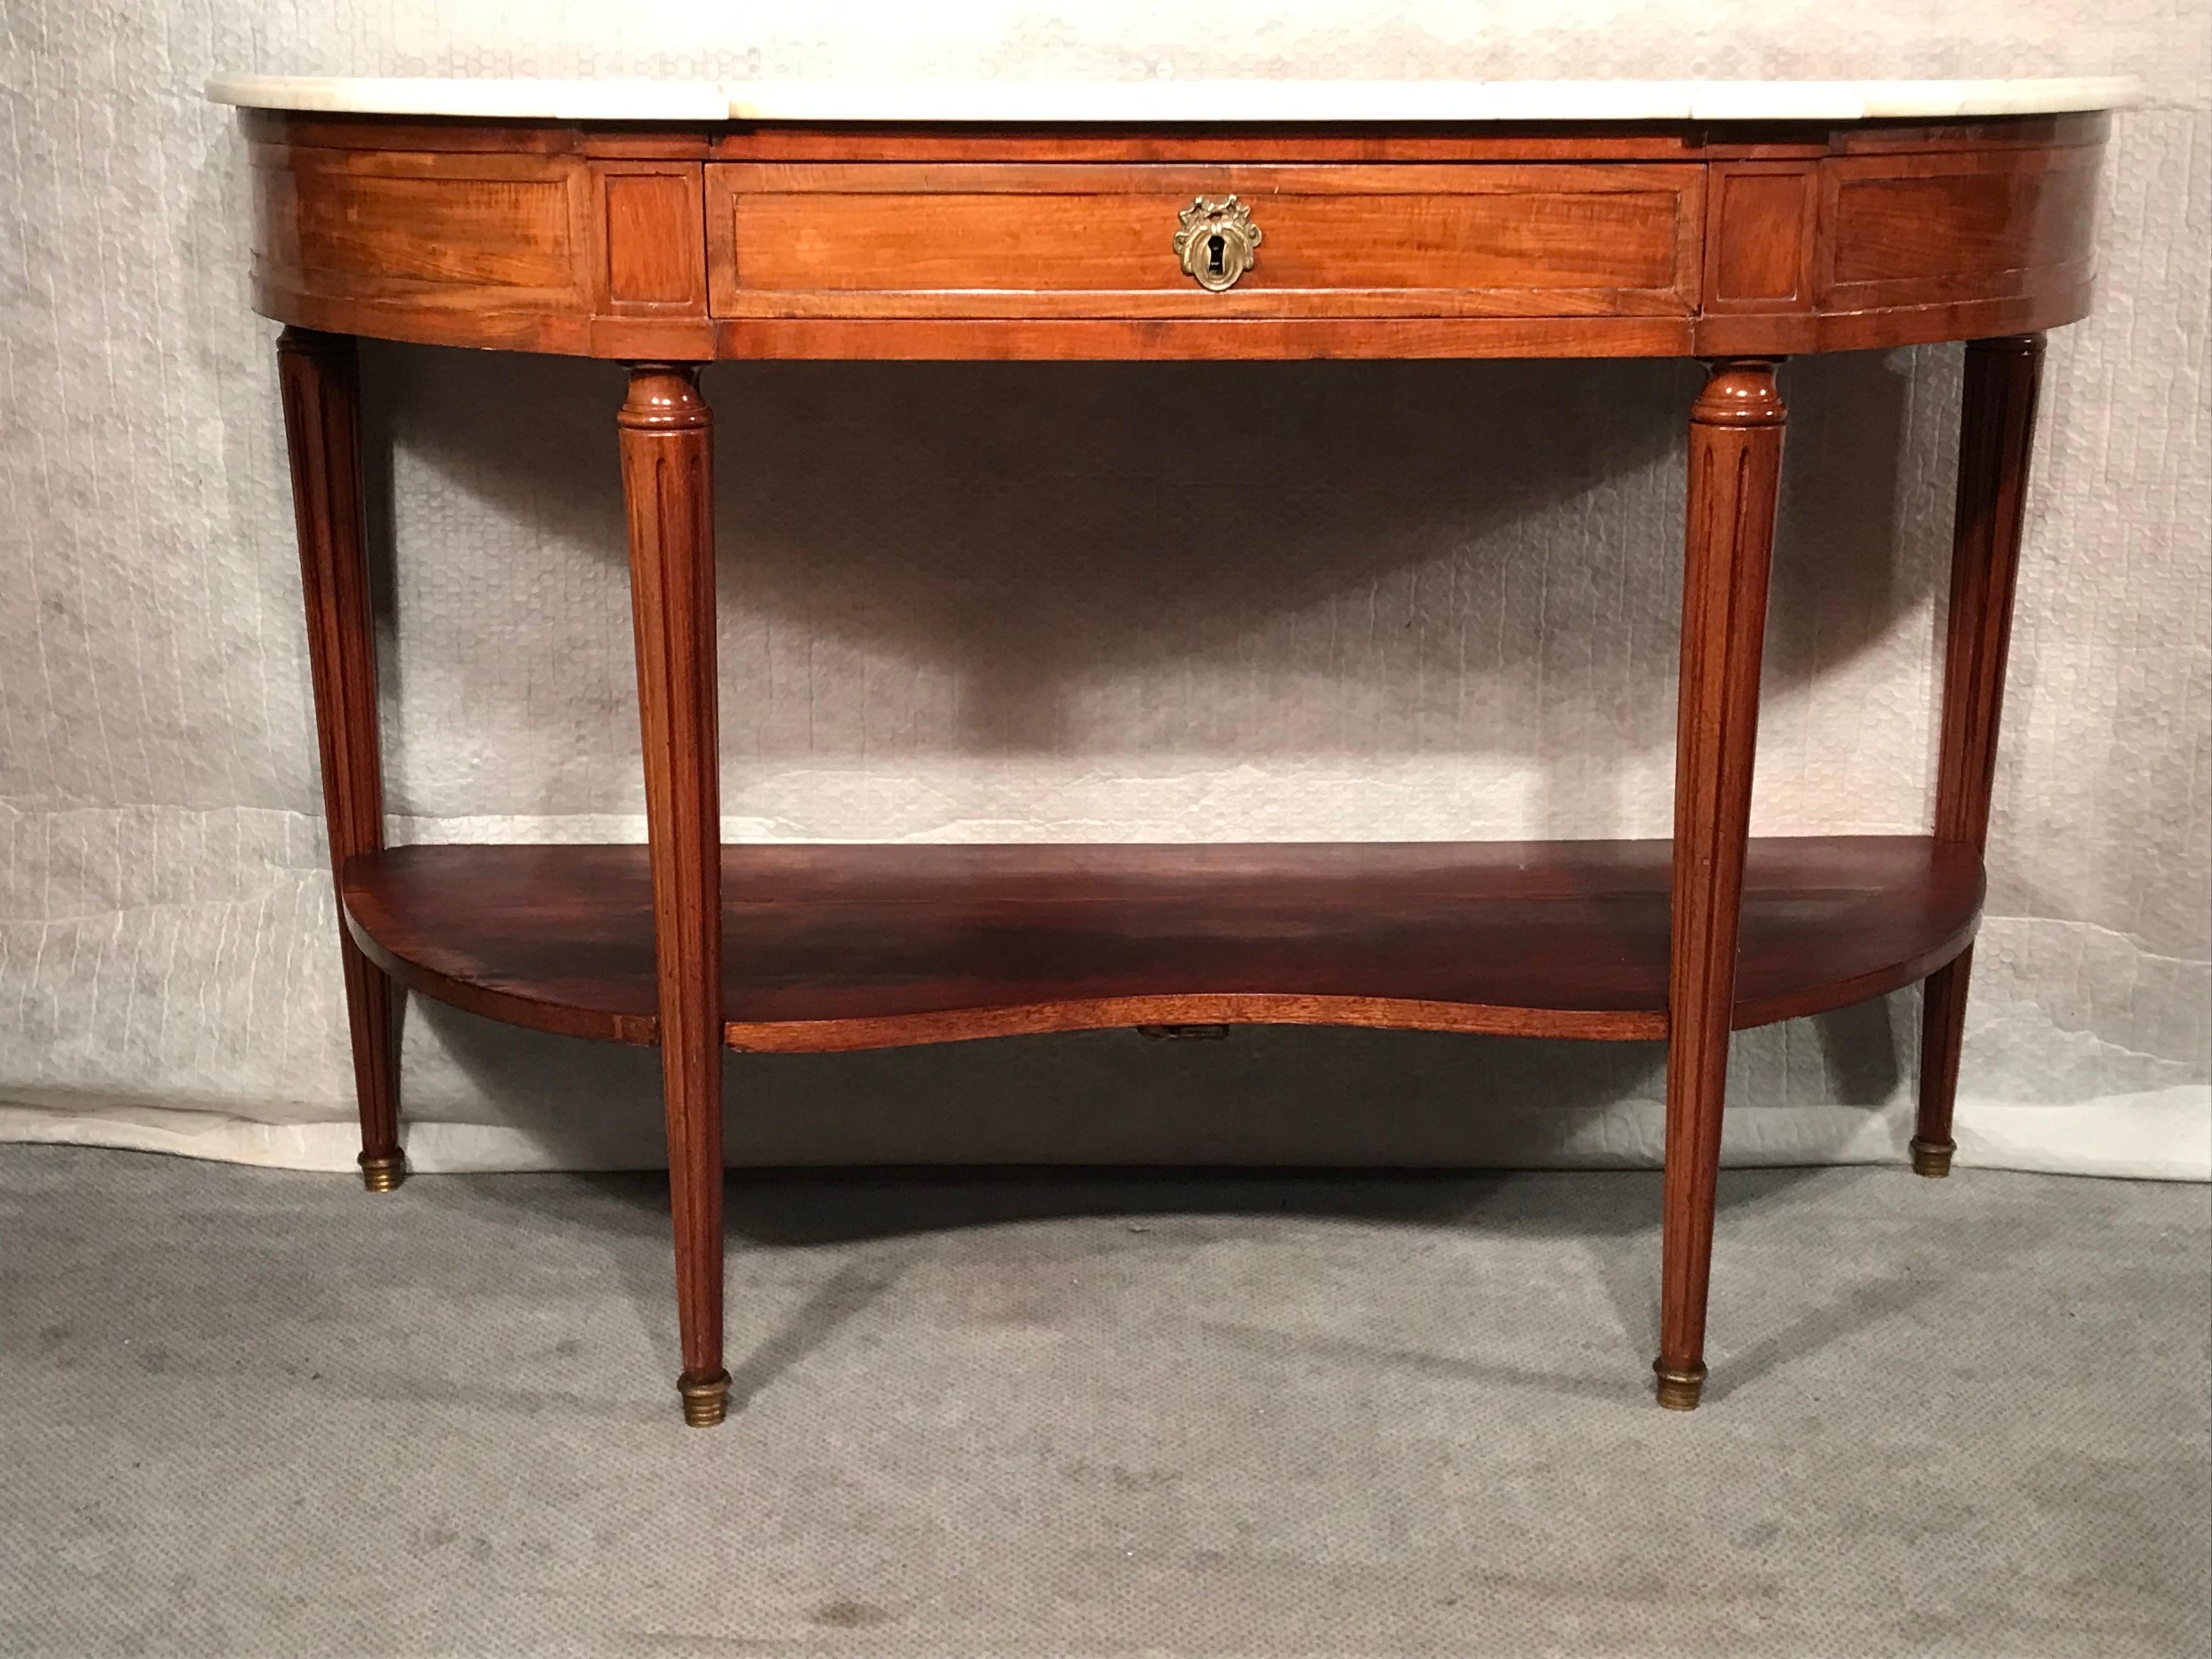 This elegant French Console table dates back to the first quarter of the 19th century. The Directoire console table has a pretty mahogany veneer. The Demi lune table stands on fluted legs. It has a white marble top and one mahogany etagere in the